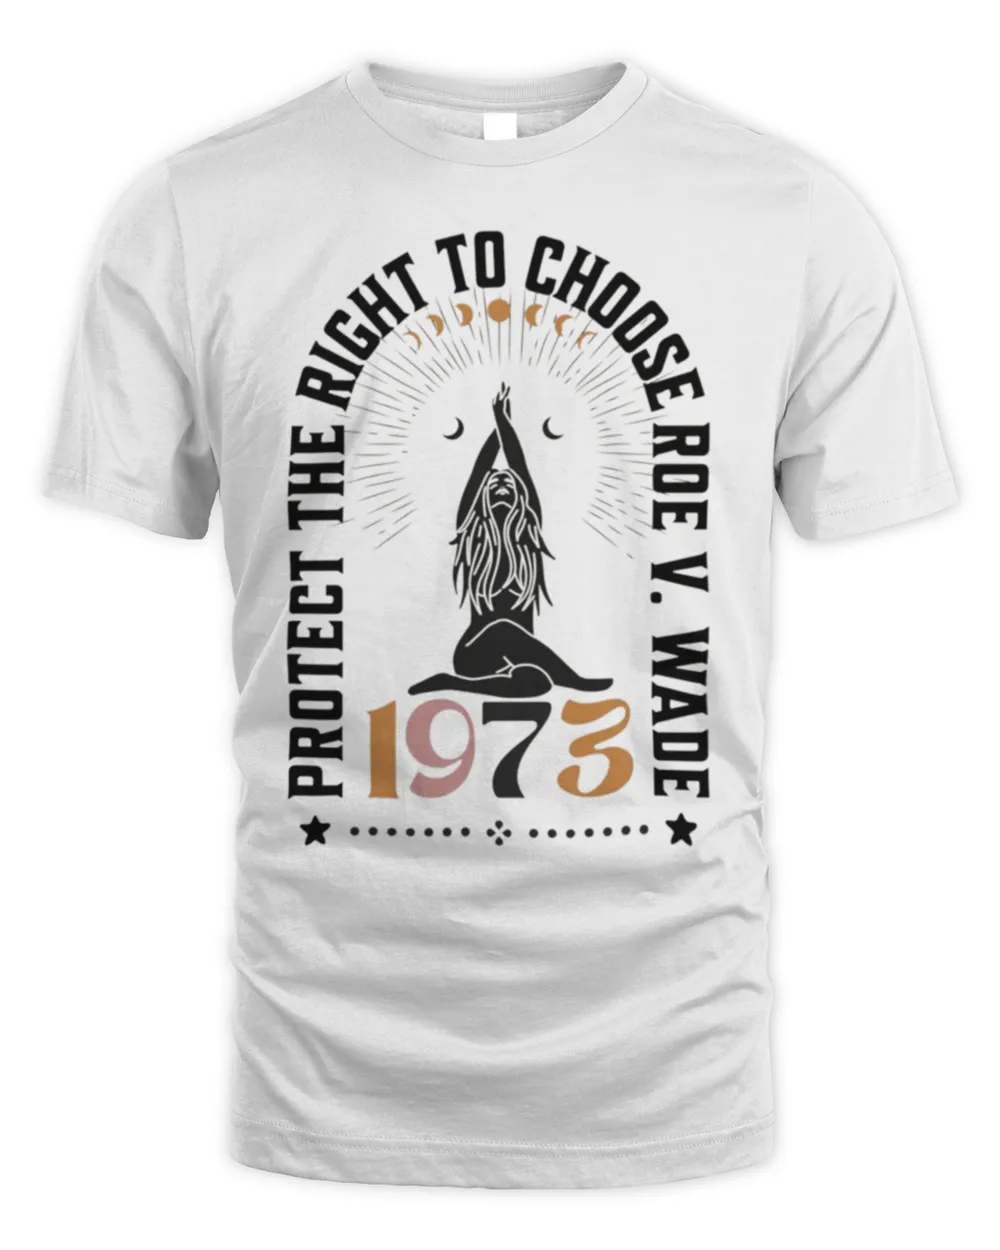 Abortion Rights Are Human Rights 20224127 T-Shirt